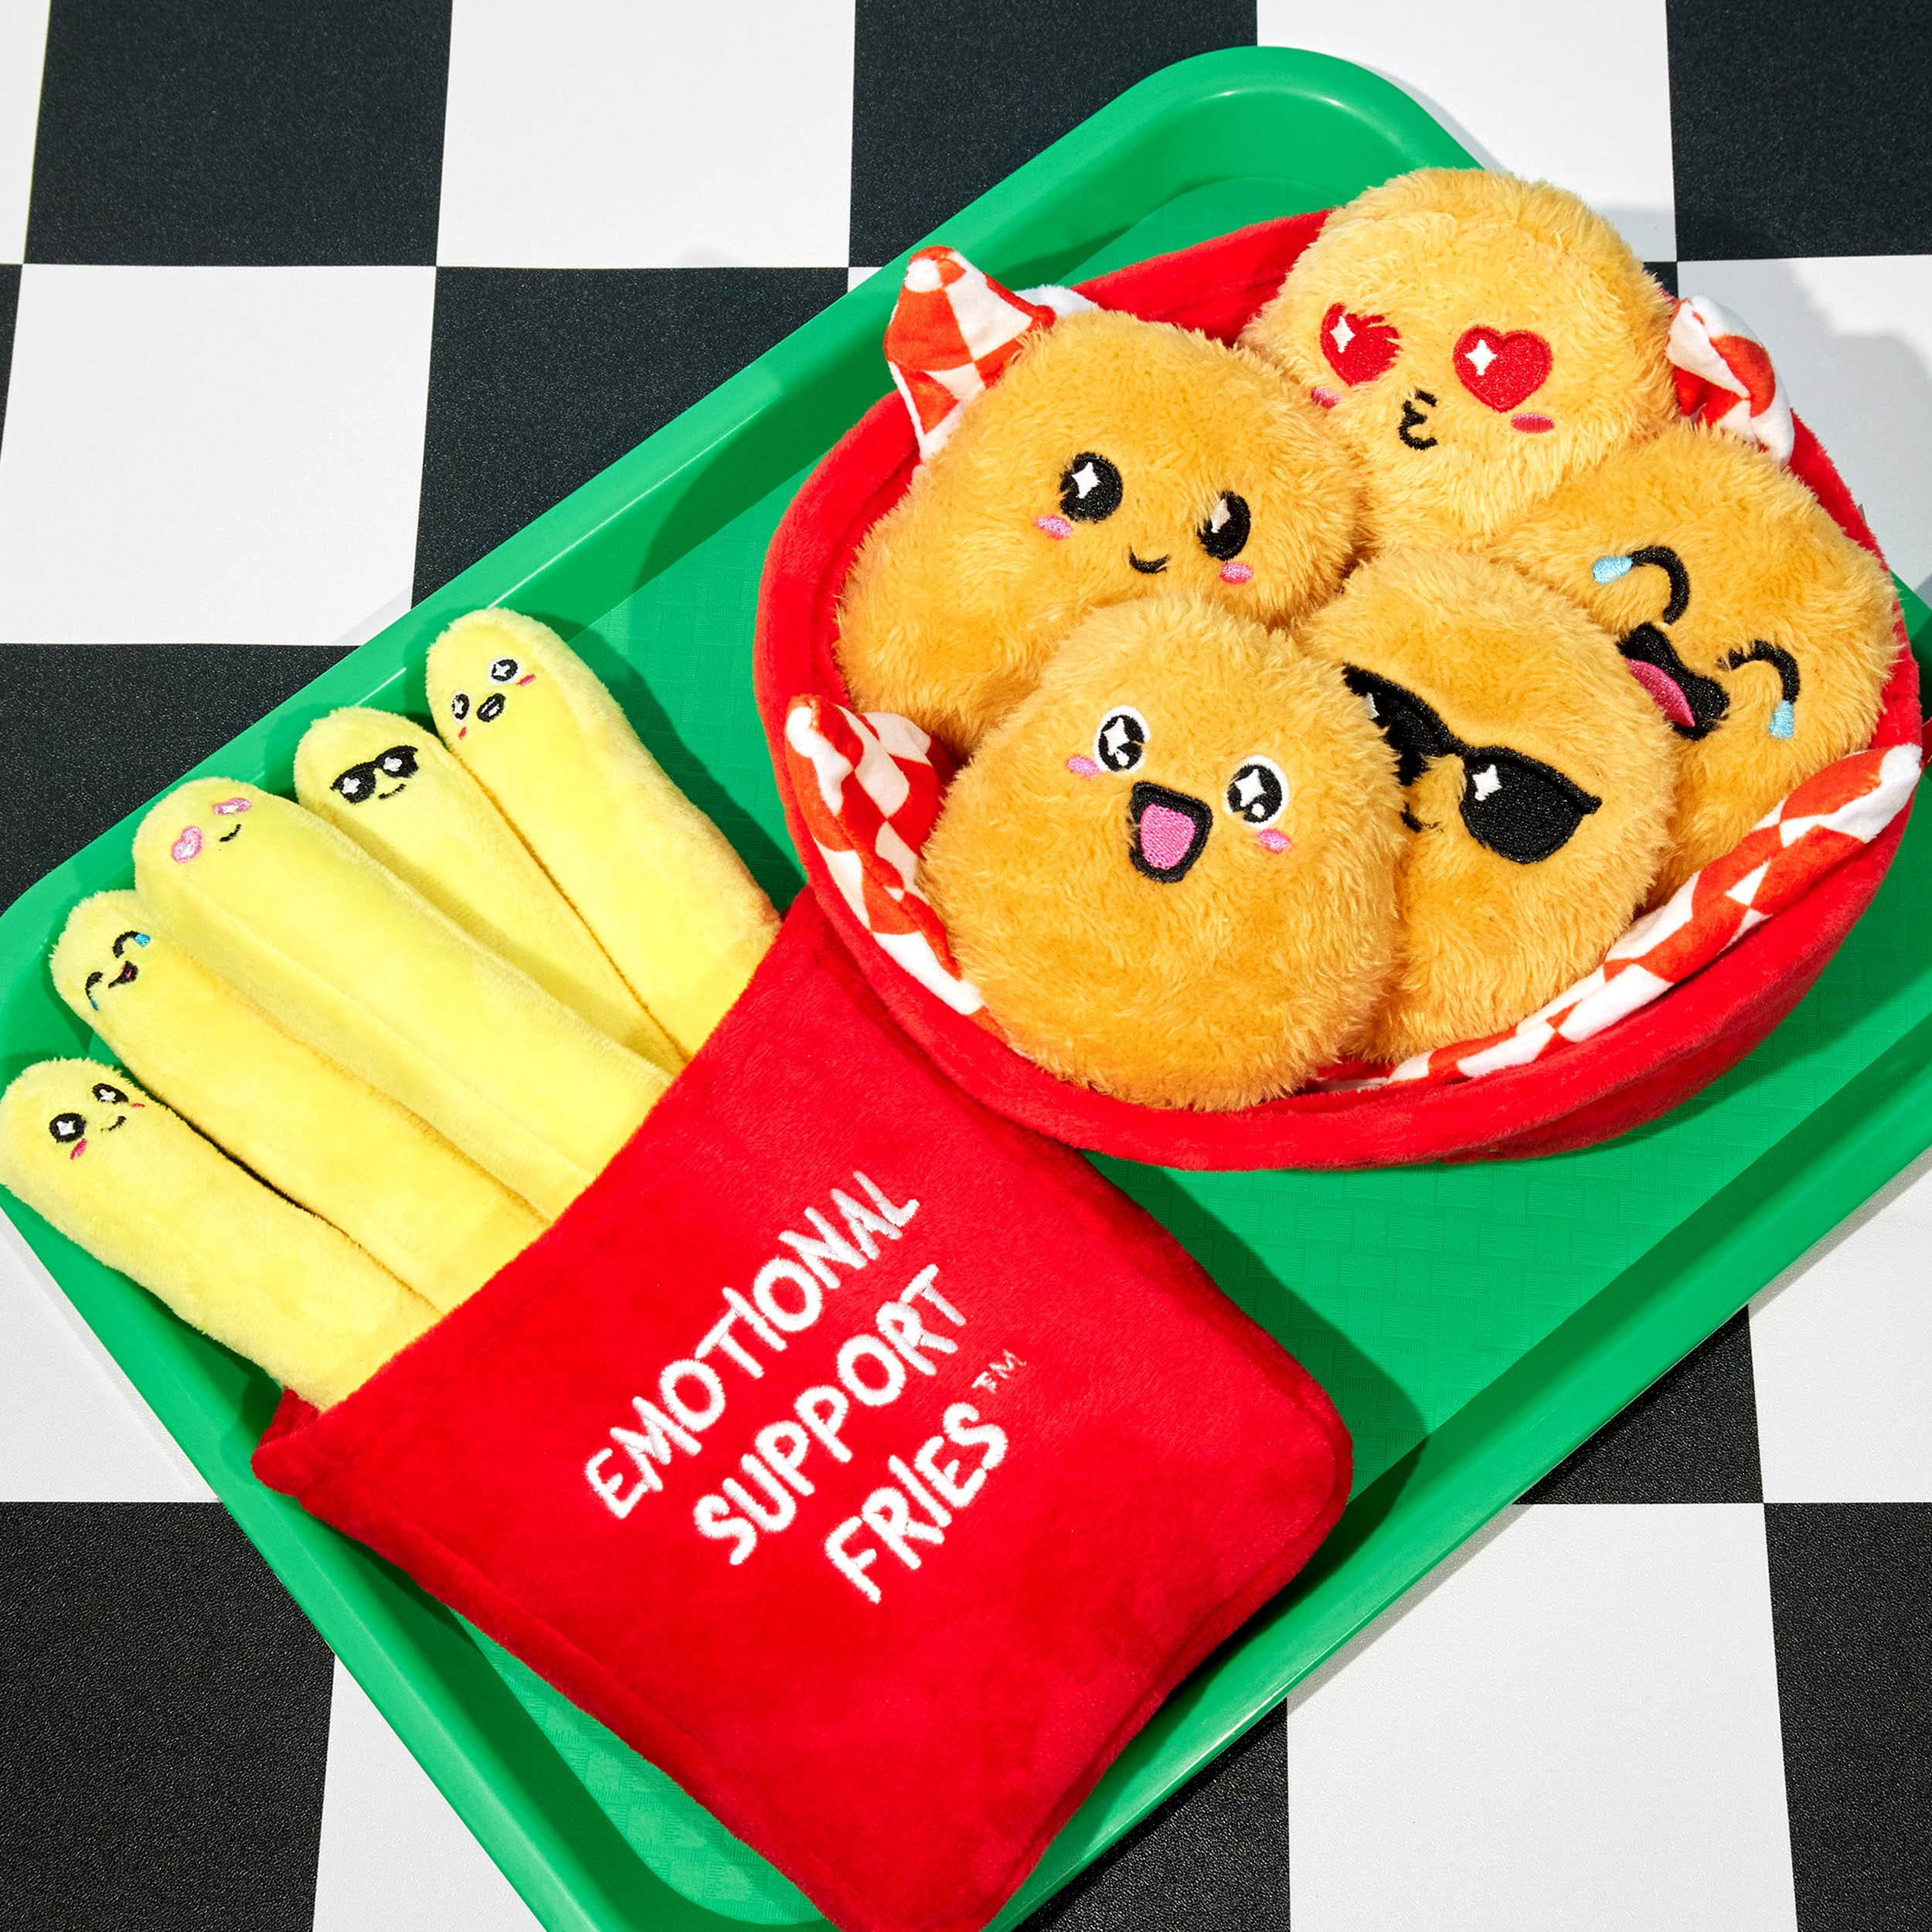 Great Choice Products Emotional Support Fries - Viral Cuddly Plush Comfort Food